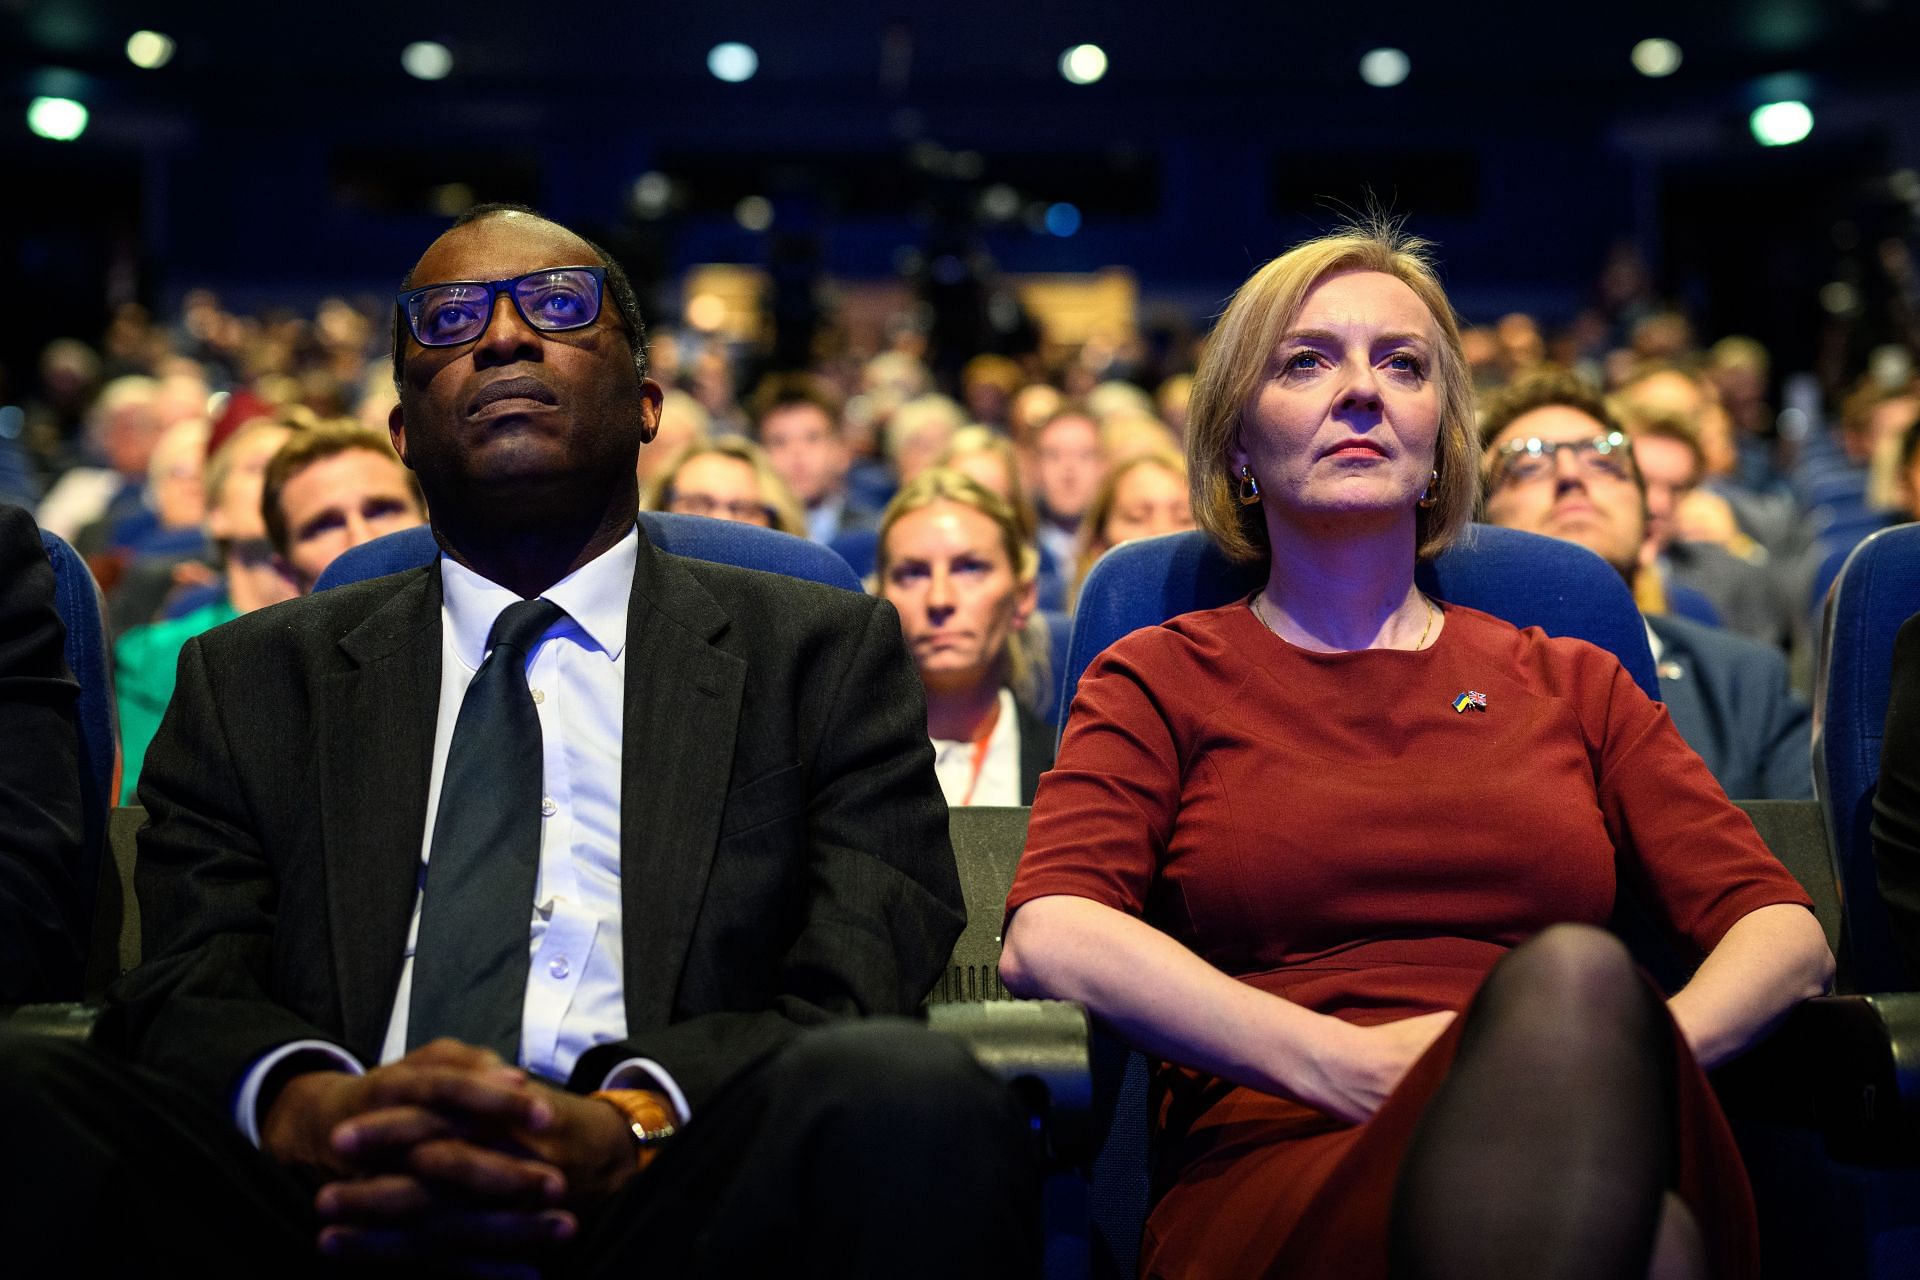 Liz Truss fired Kwasi Kwarteng just 38 days into his tenure (Image via Getty Images)